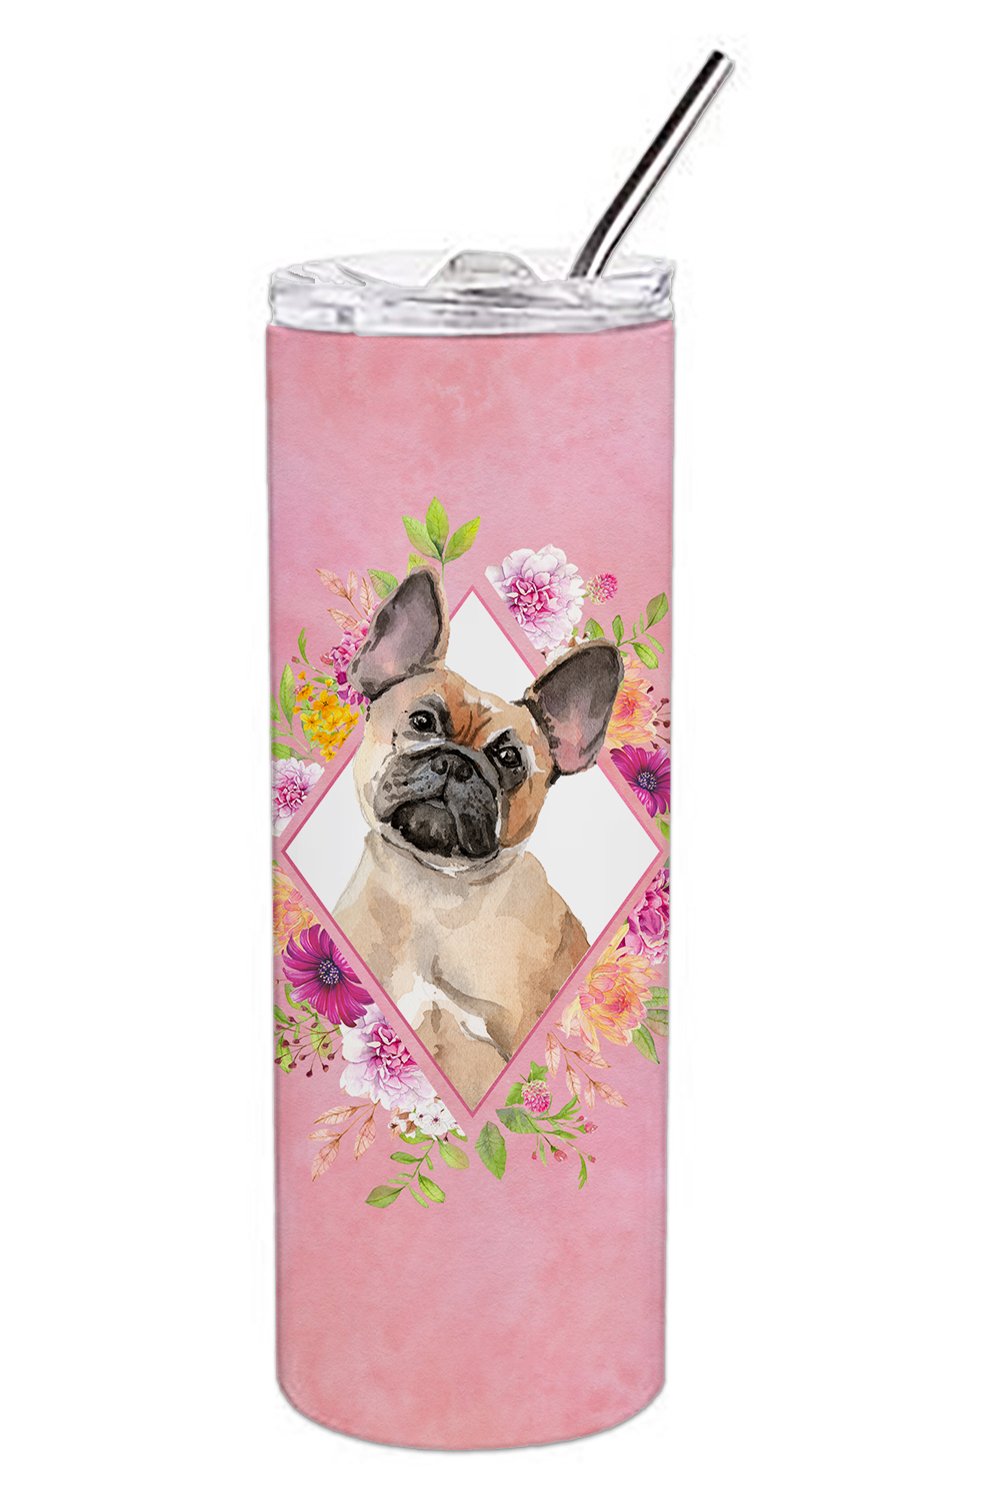 Fawn French Bulldog Pink Flowers Double Walled Stainless Steel 20 oz Skinny Tumbler CK4238TBL20 by Caroline's Treasures